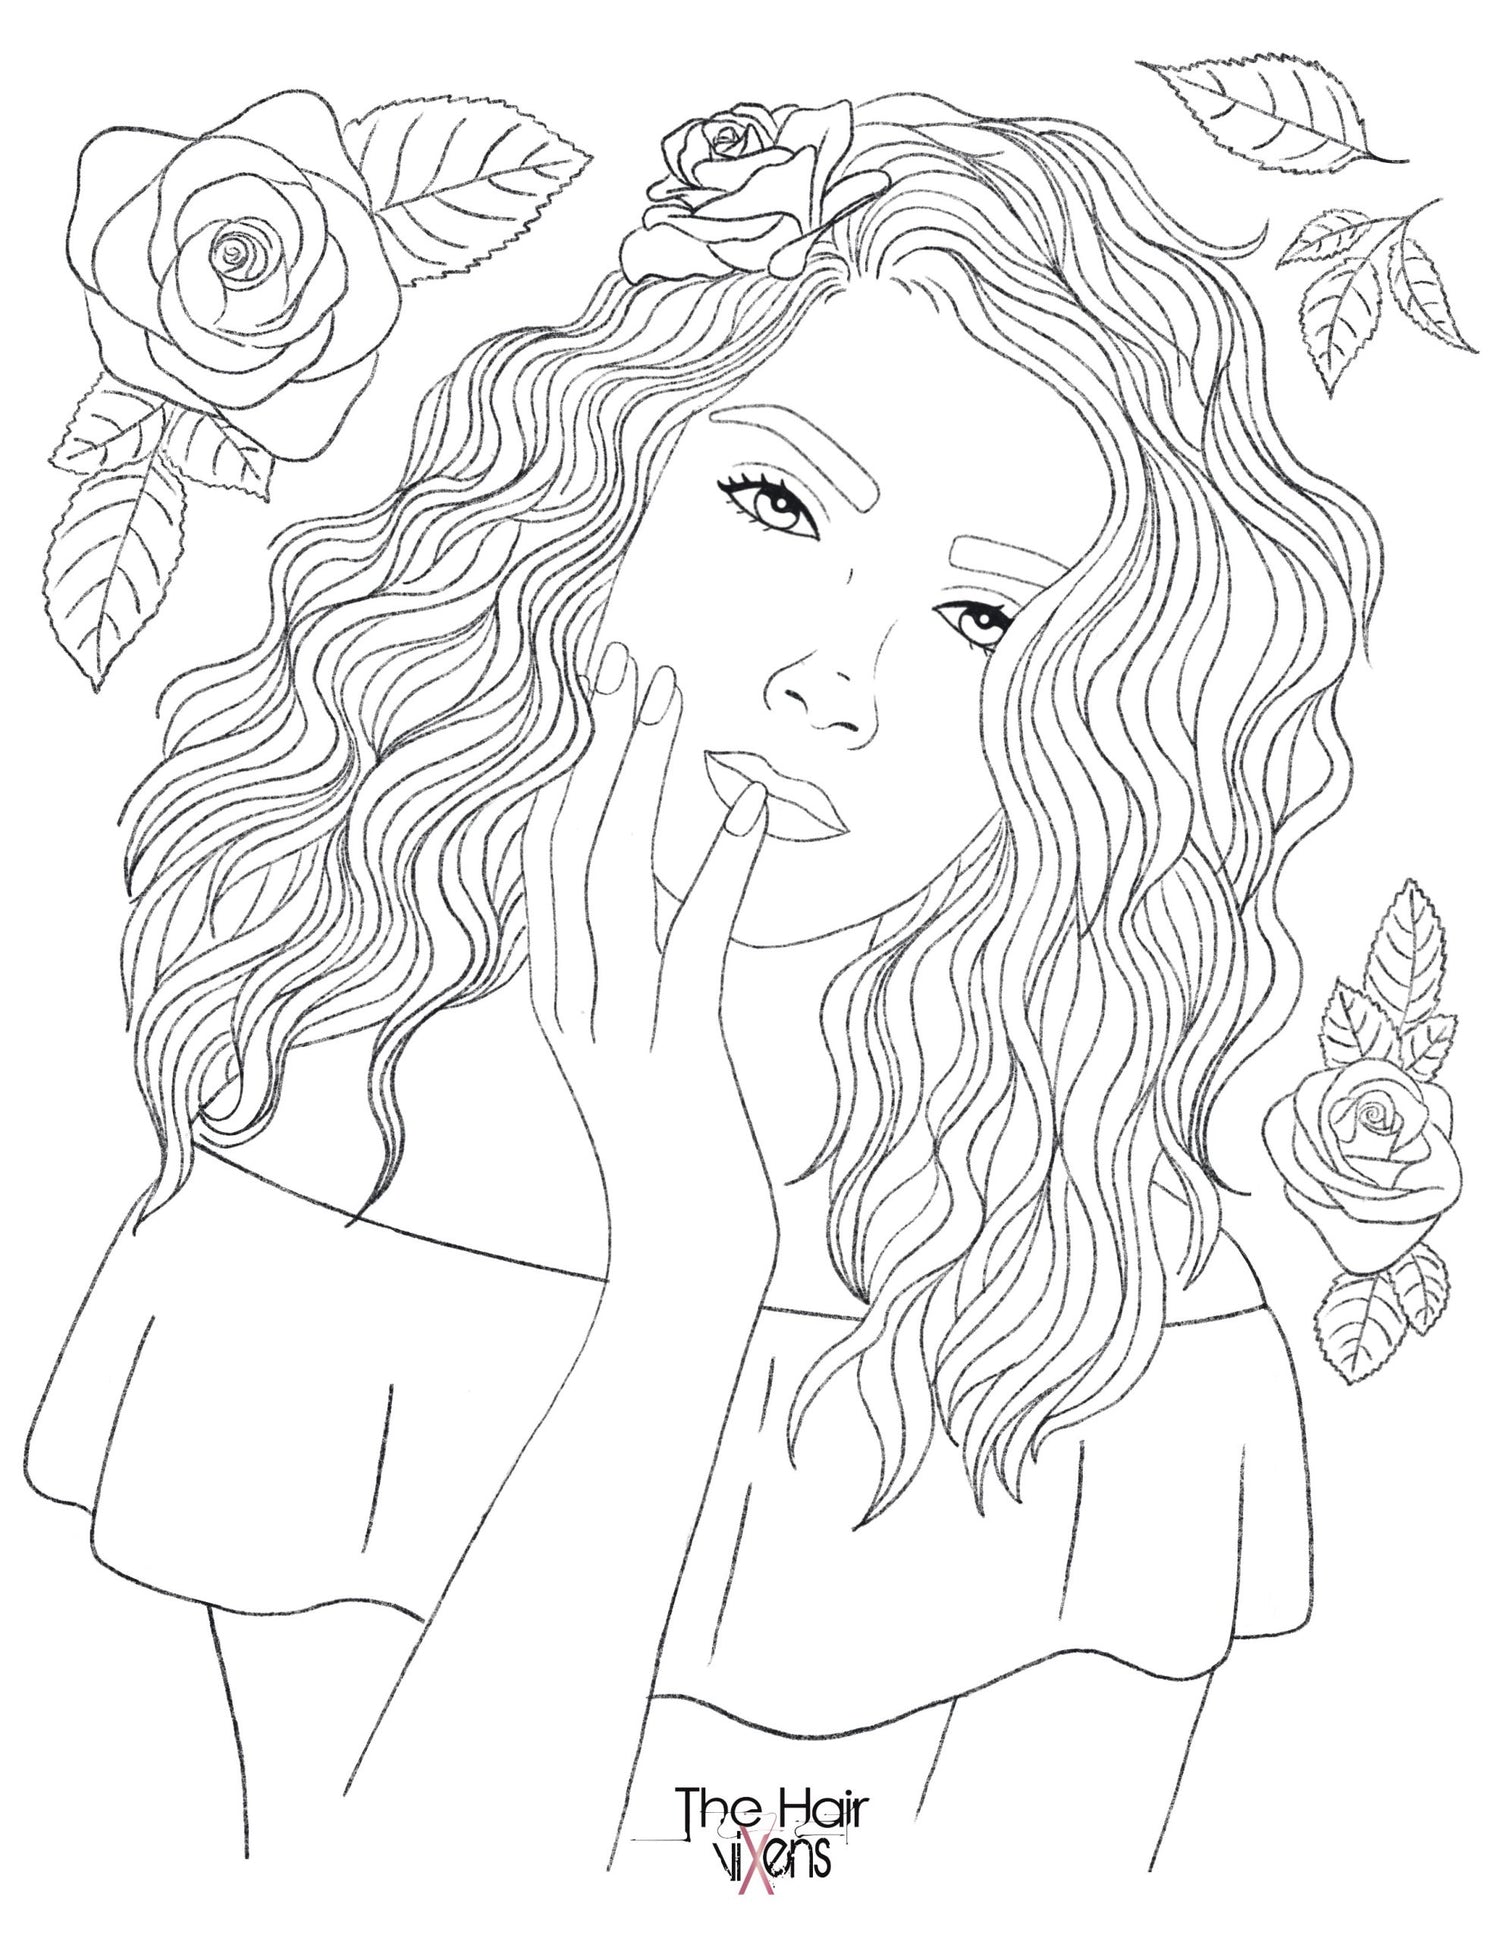 Women of the World Coloring and Activity Book (Printable)